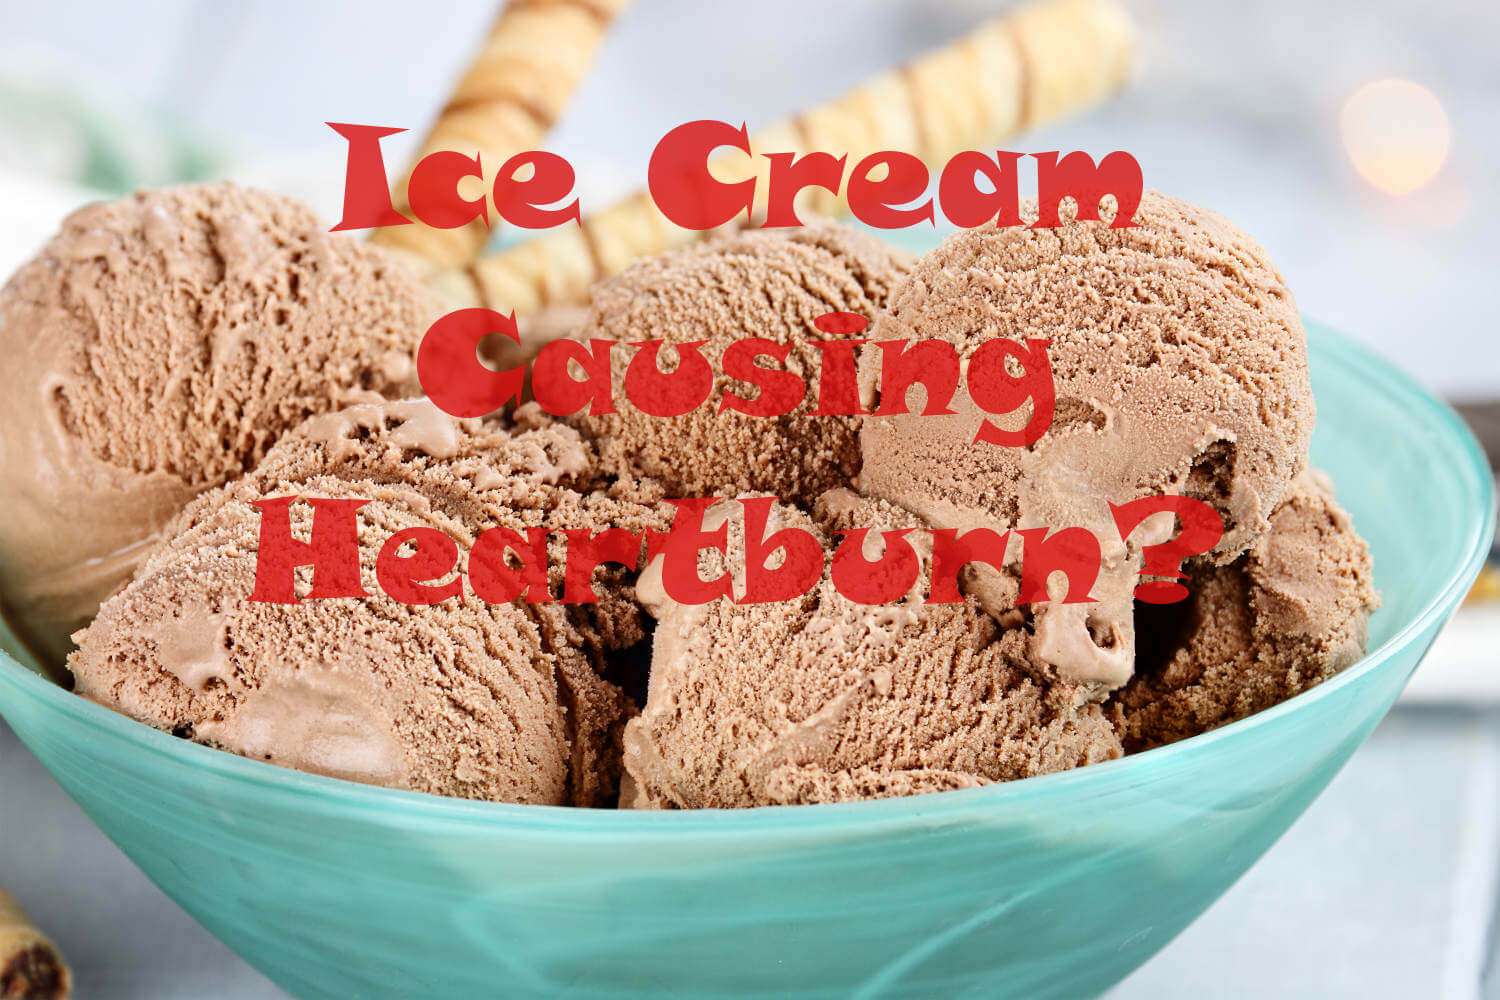 Why Does Eating Ice Cream Cause Heartburn?